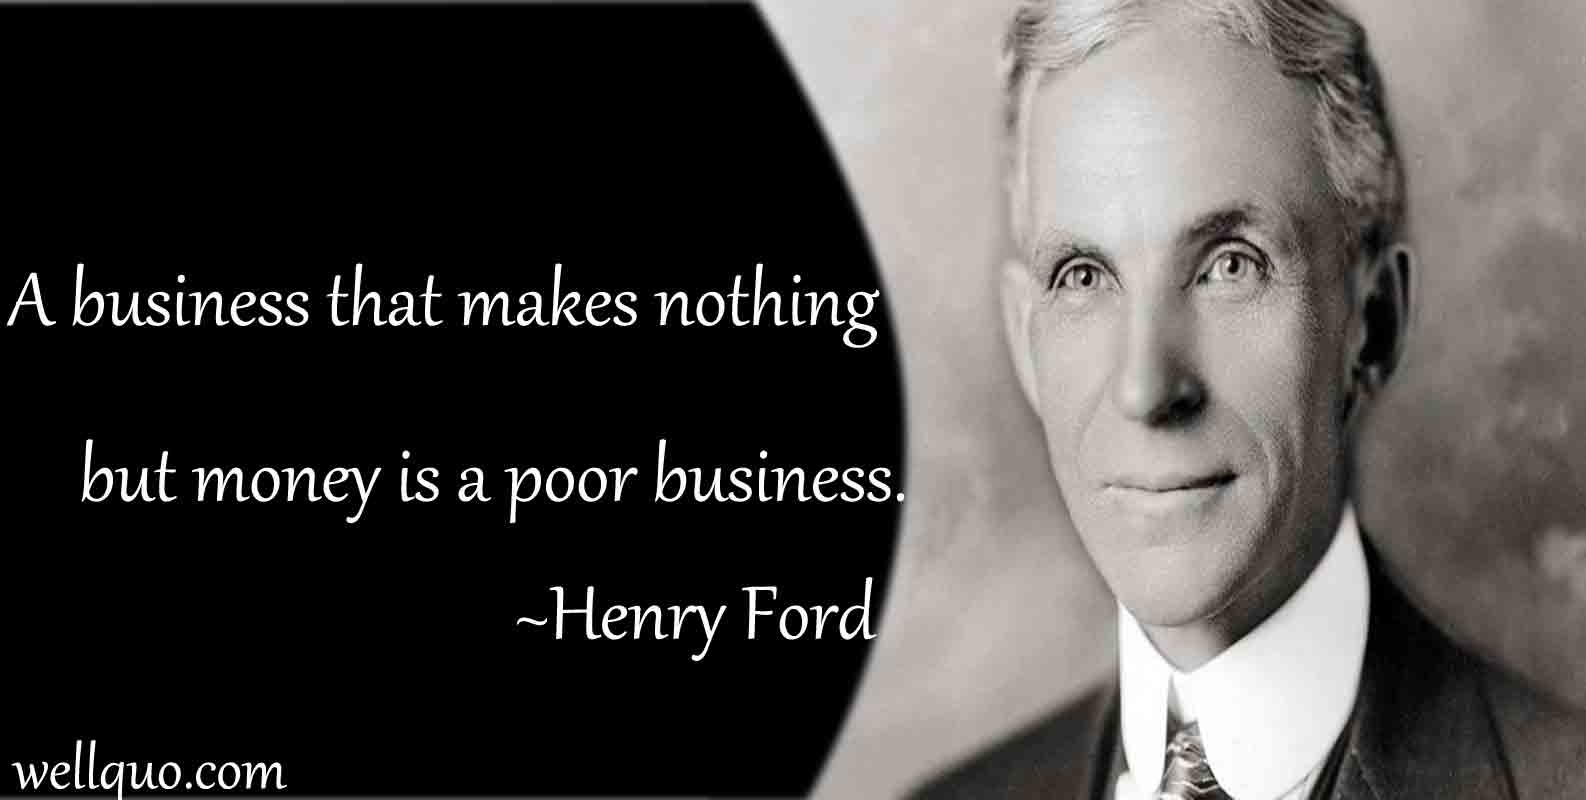 Henry ford quote on business